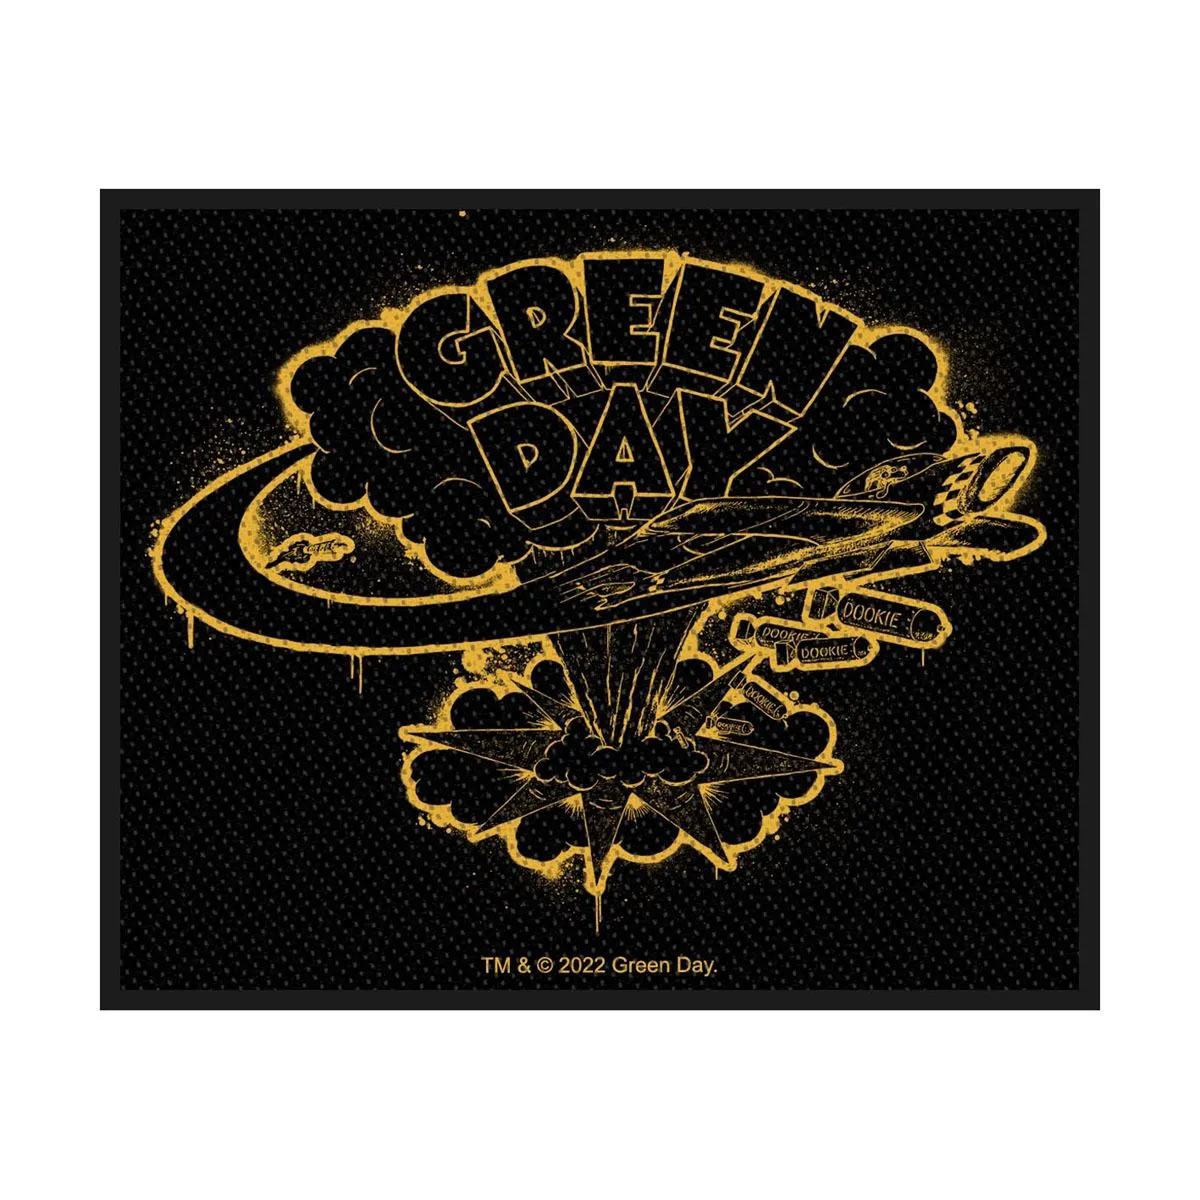 green_day_dookie_patch_01_copy_1685097994.jpg